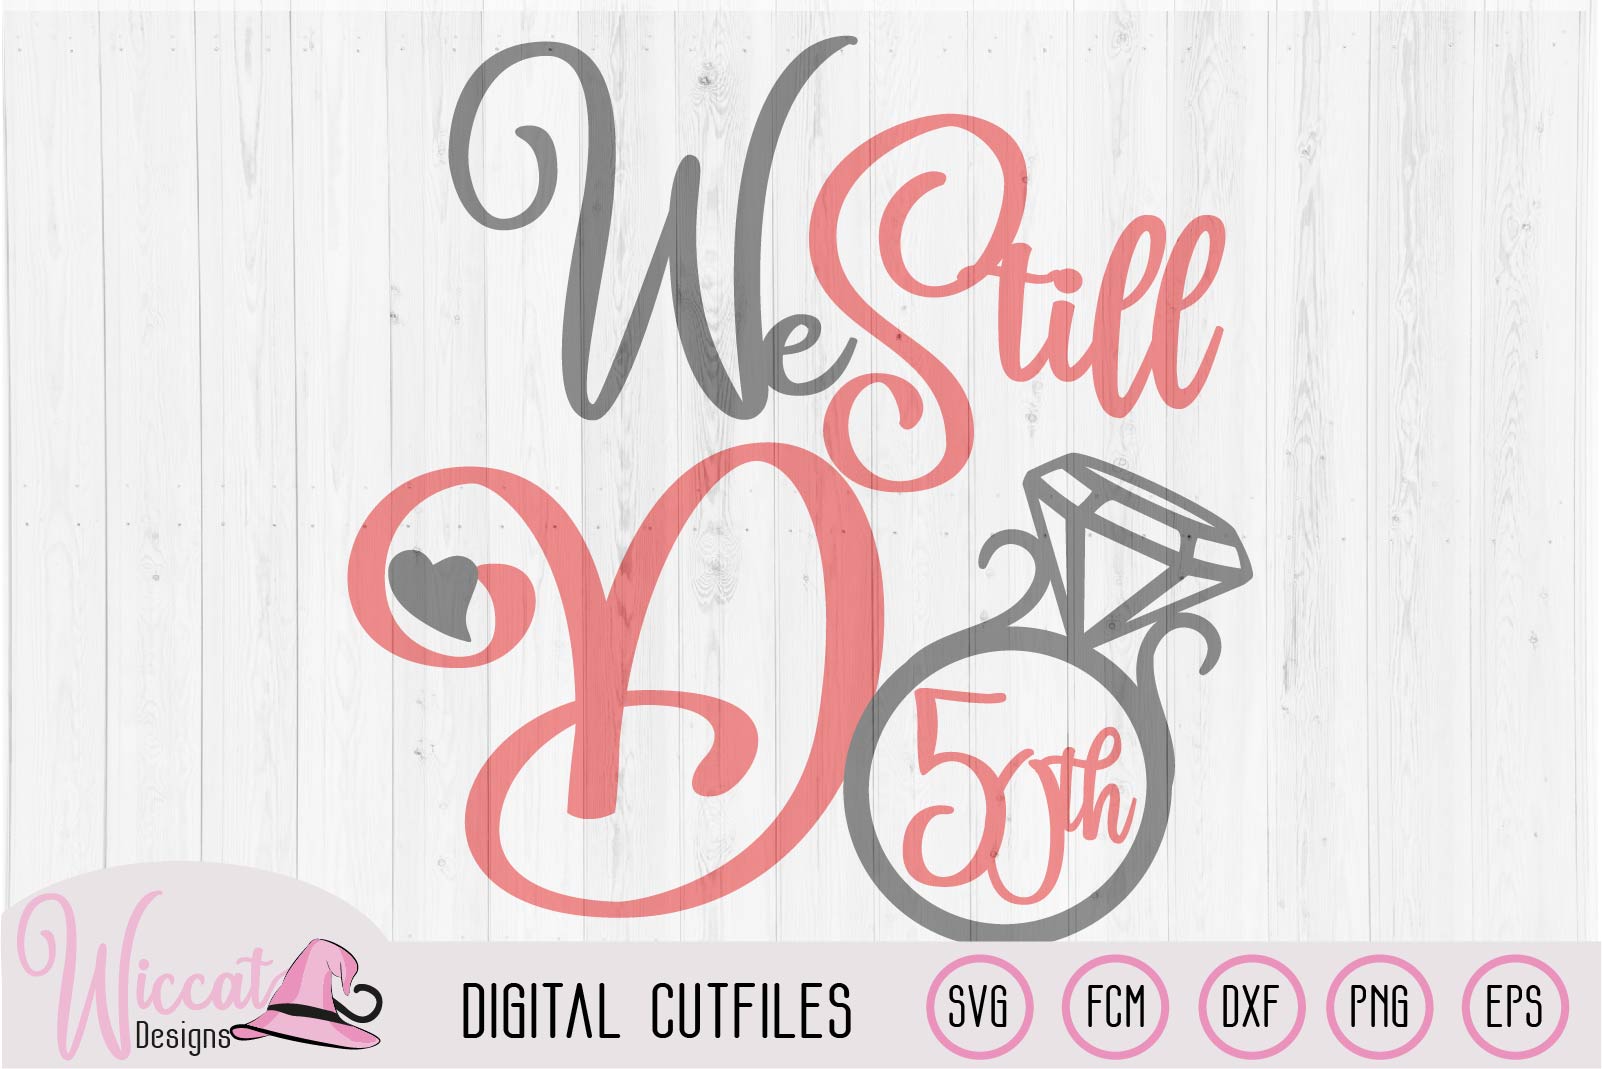 Get 50th Anniversary Svg Free Pics Free Svg Files Silhouette And Cricut Cutting Files